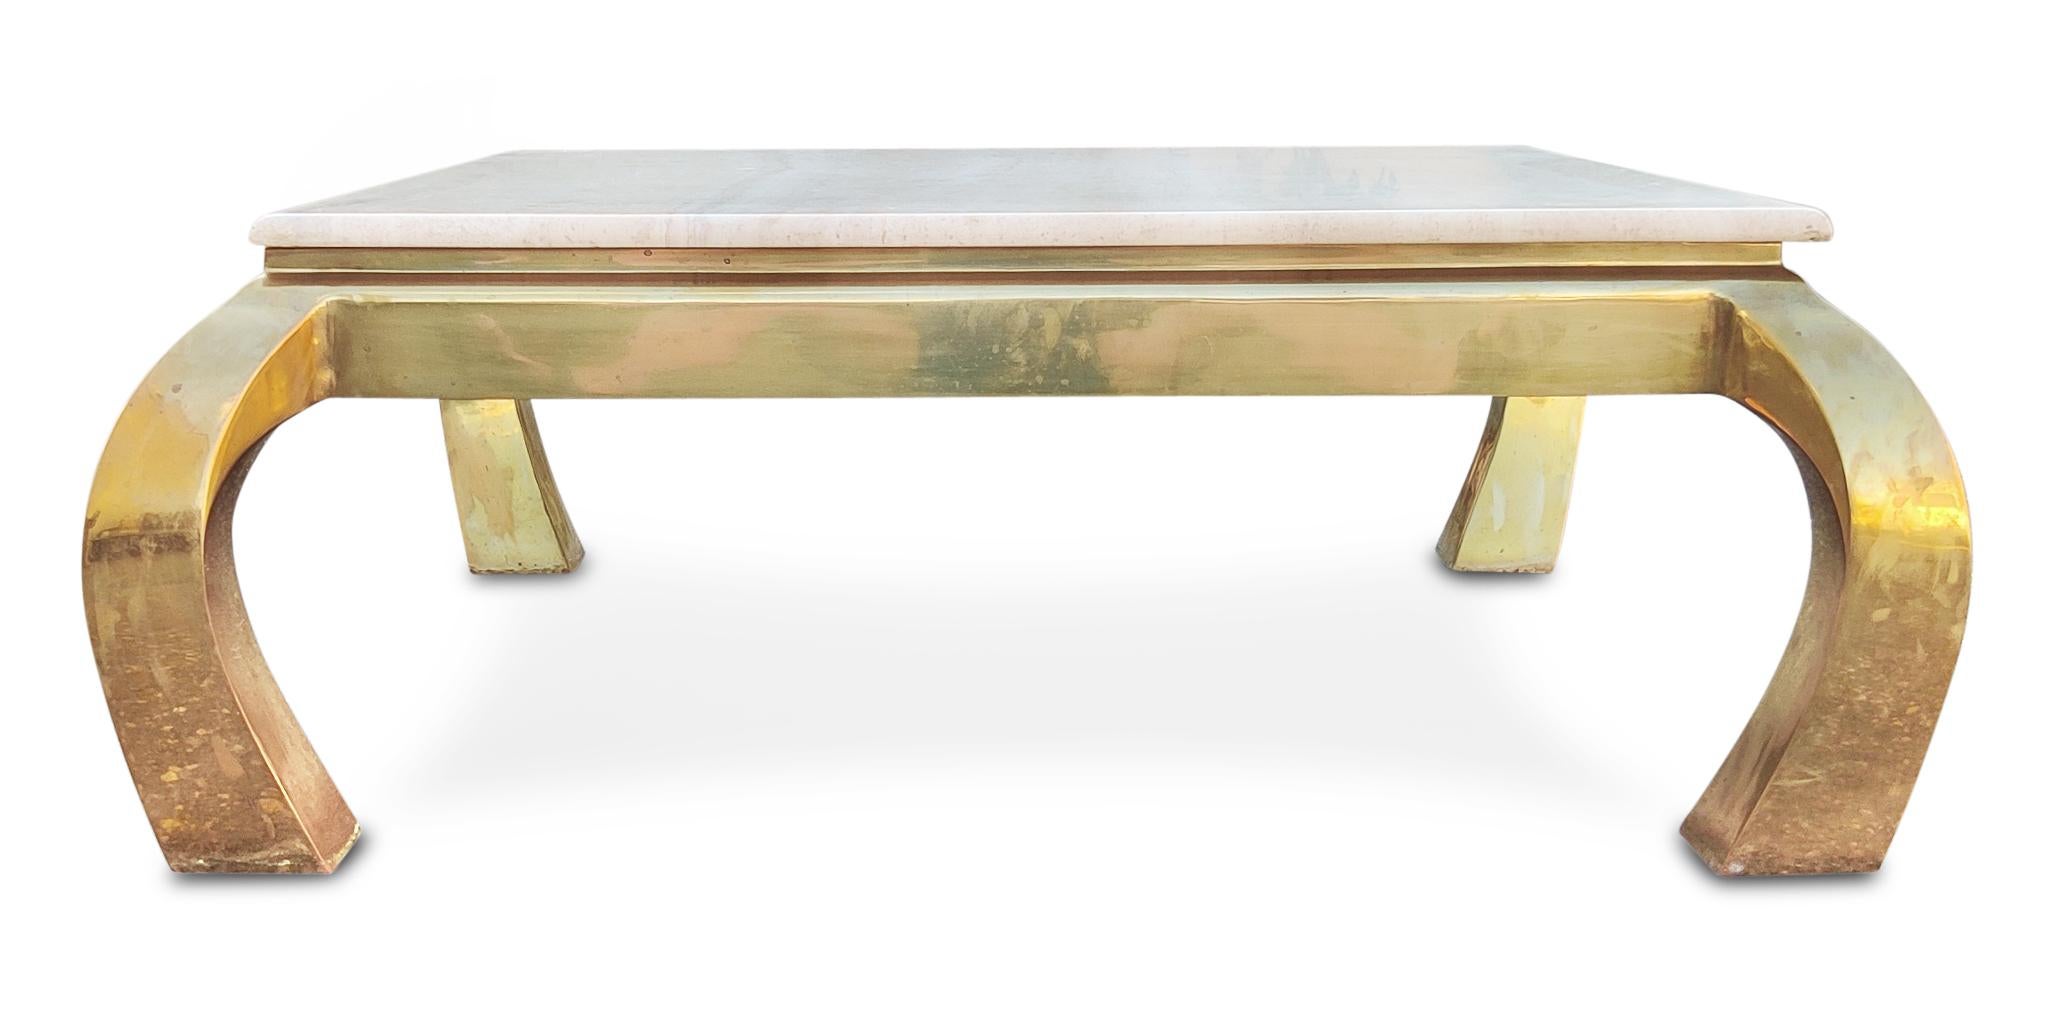 Henredon Vintage Hollywood Regency Style Polished Travertine Brass Coffee Table  In Good Condition For Sale In Philadelphia, PA